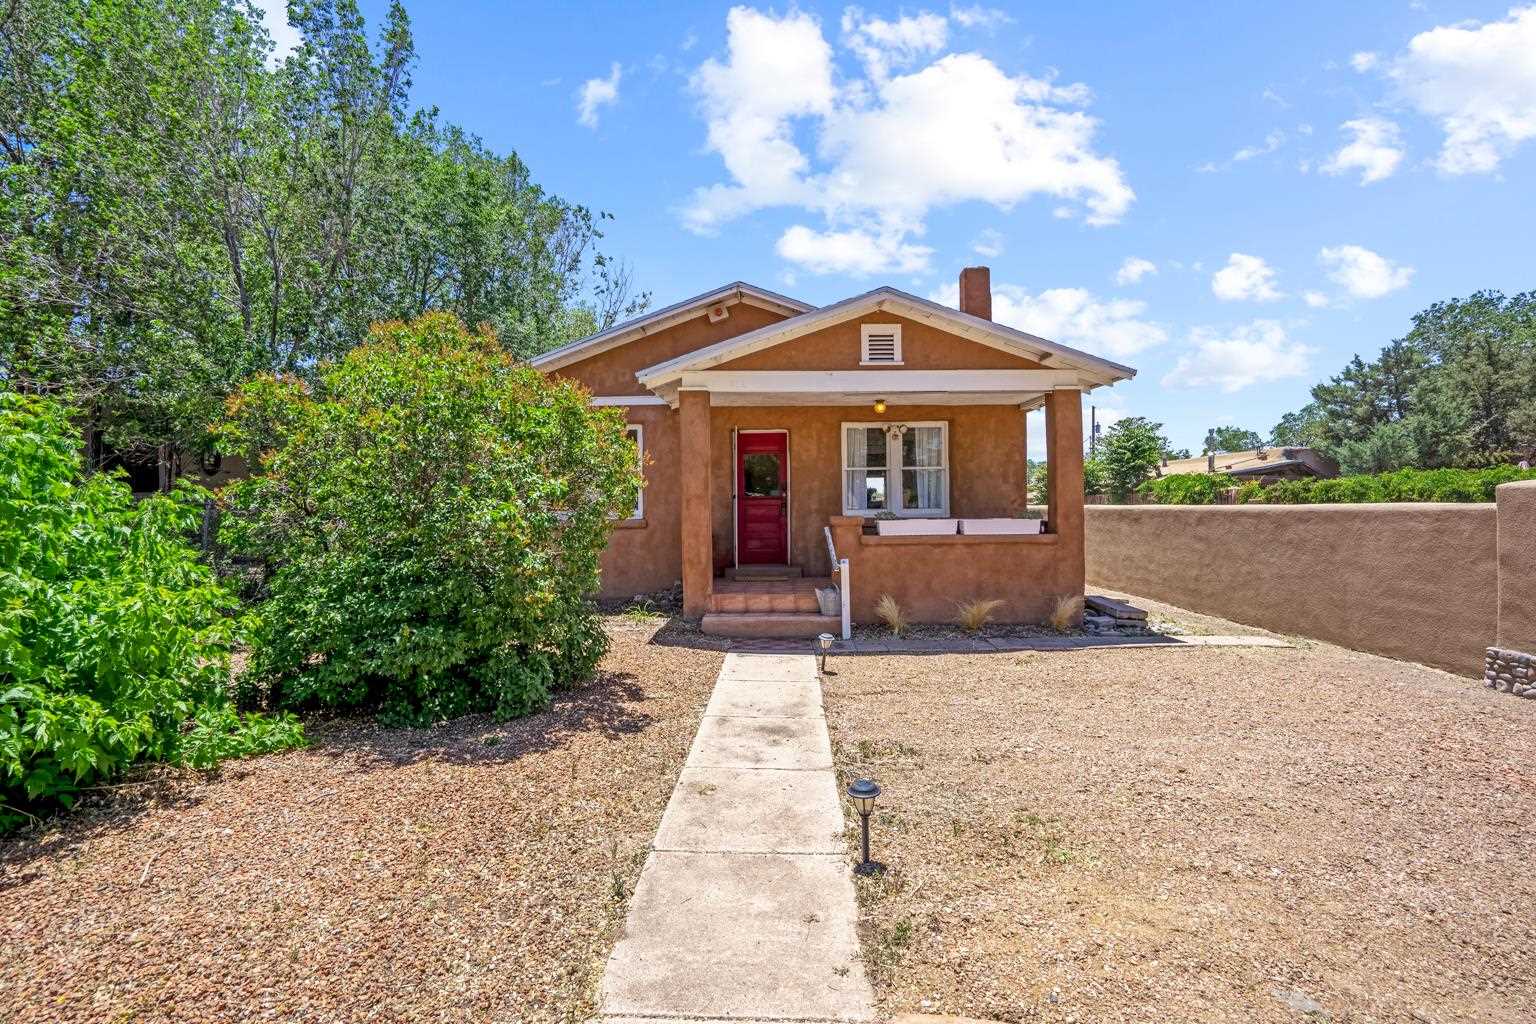 314 Guadalupe, Santa Fe, New Mexico 87501, 2 Bedrooms Bedrooms, ,1 BathroomBathrooms,Residential,For Sale,314 Guadalupe,202102633